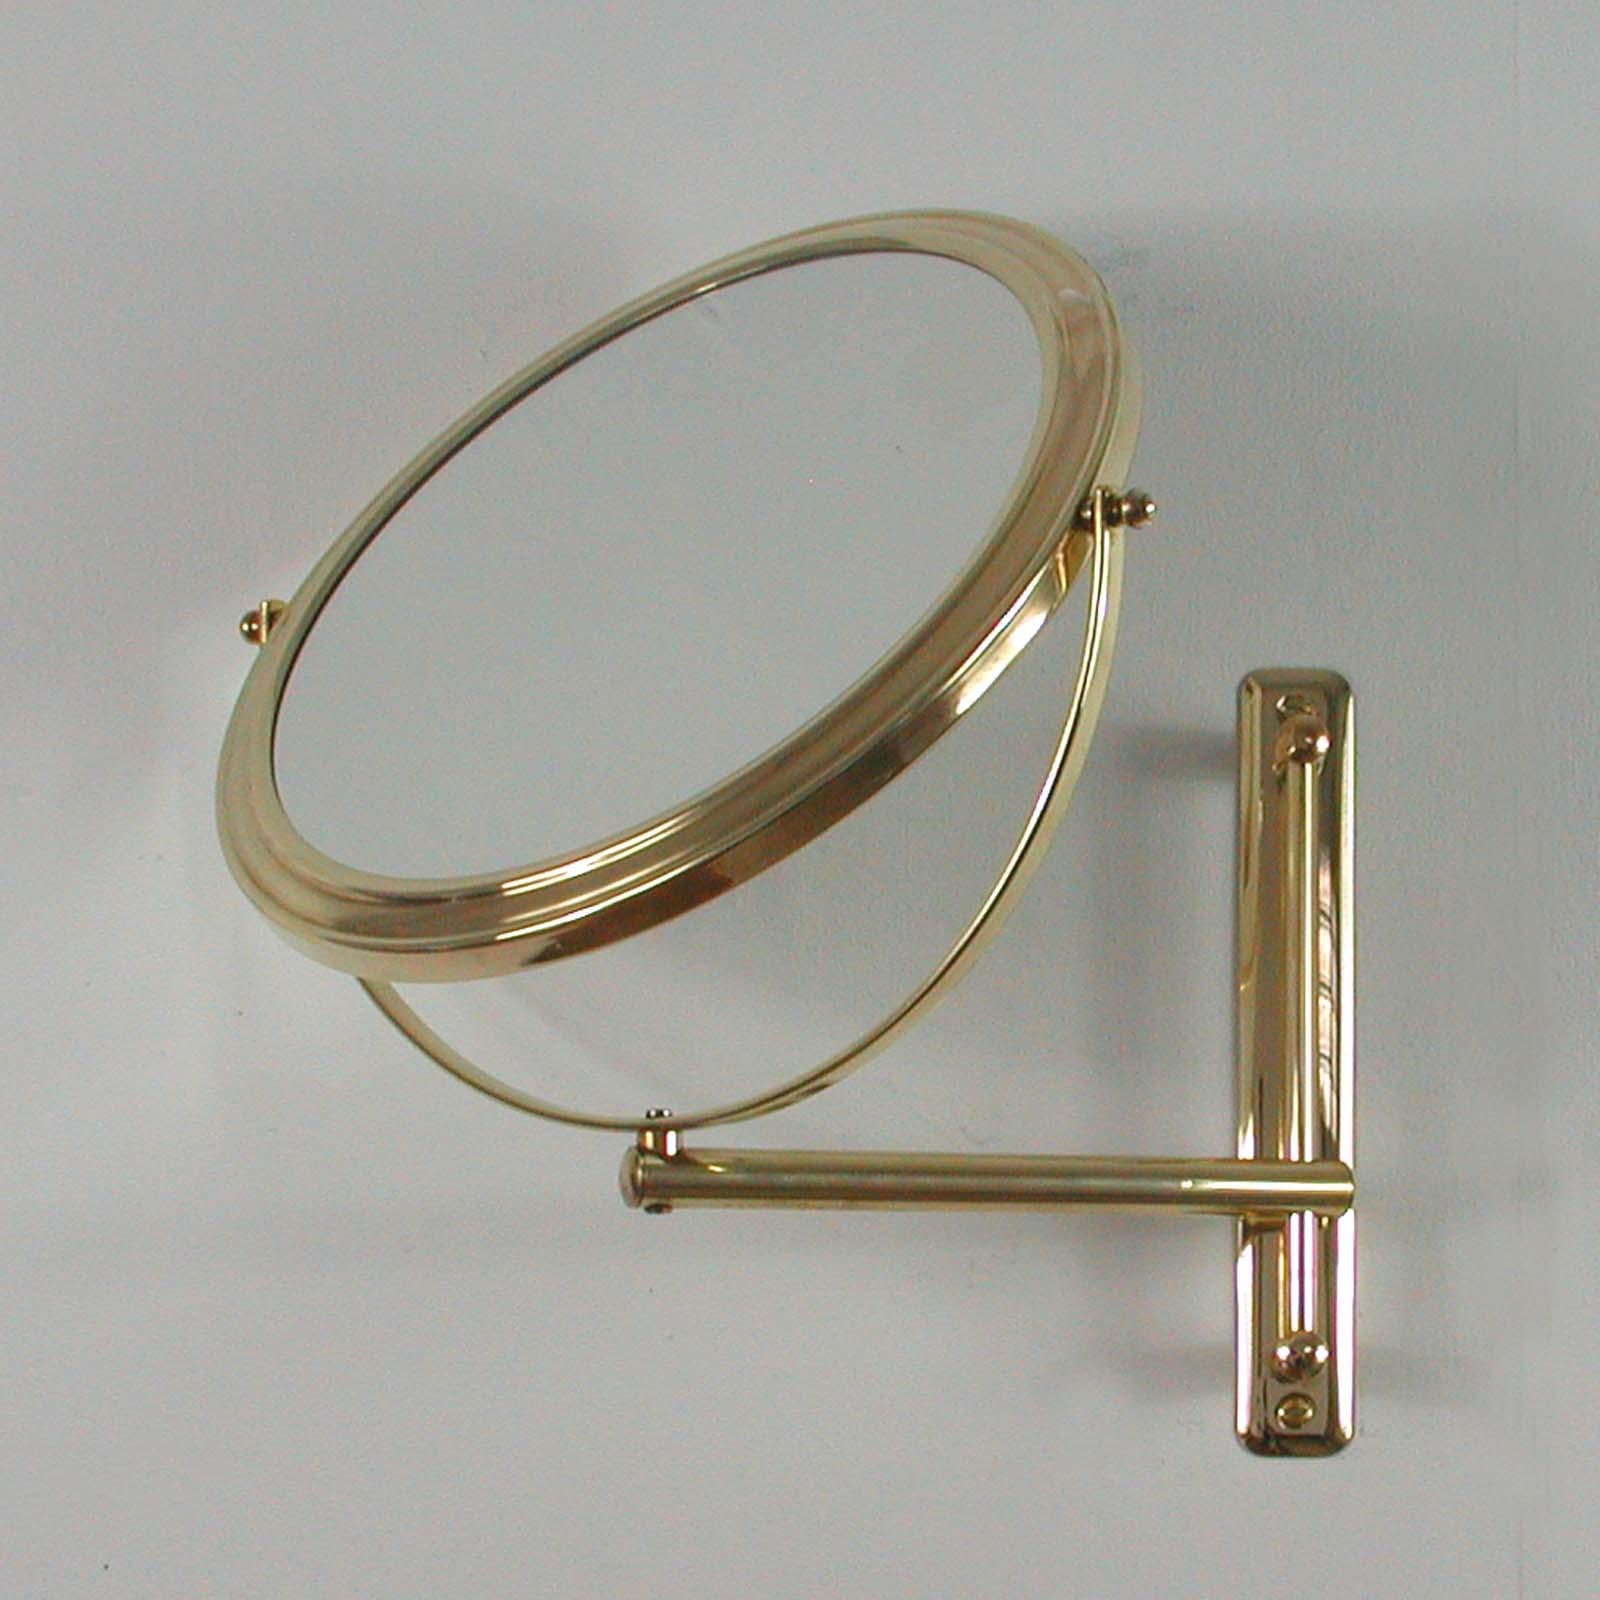 Italian Articulating and Adjustable Brass Vanity 2-Sided Wall Mirror, 1950s For Sale 4